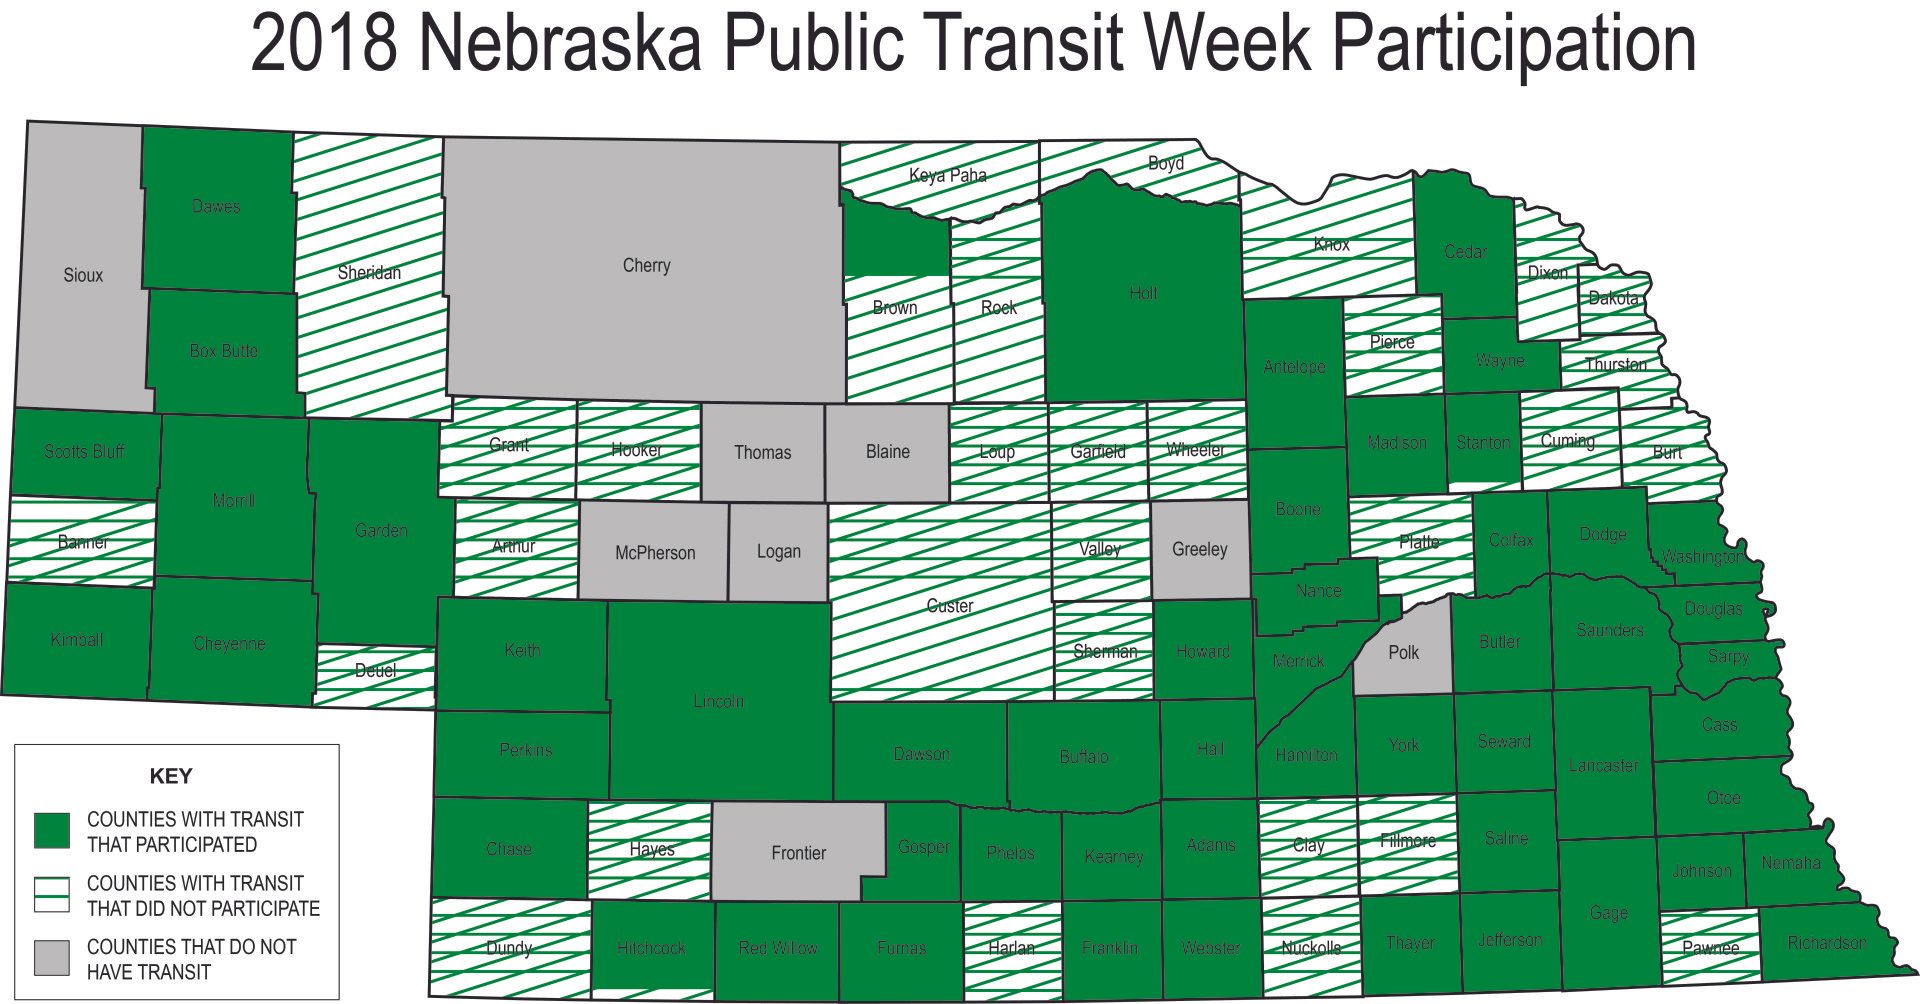 map of counties that participated in 2018 Nebraska Public Transit Week